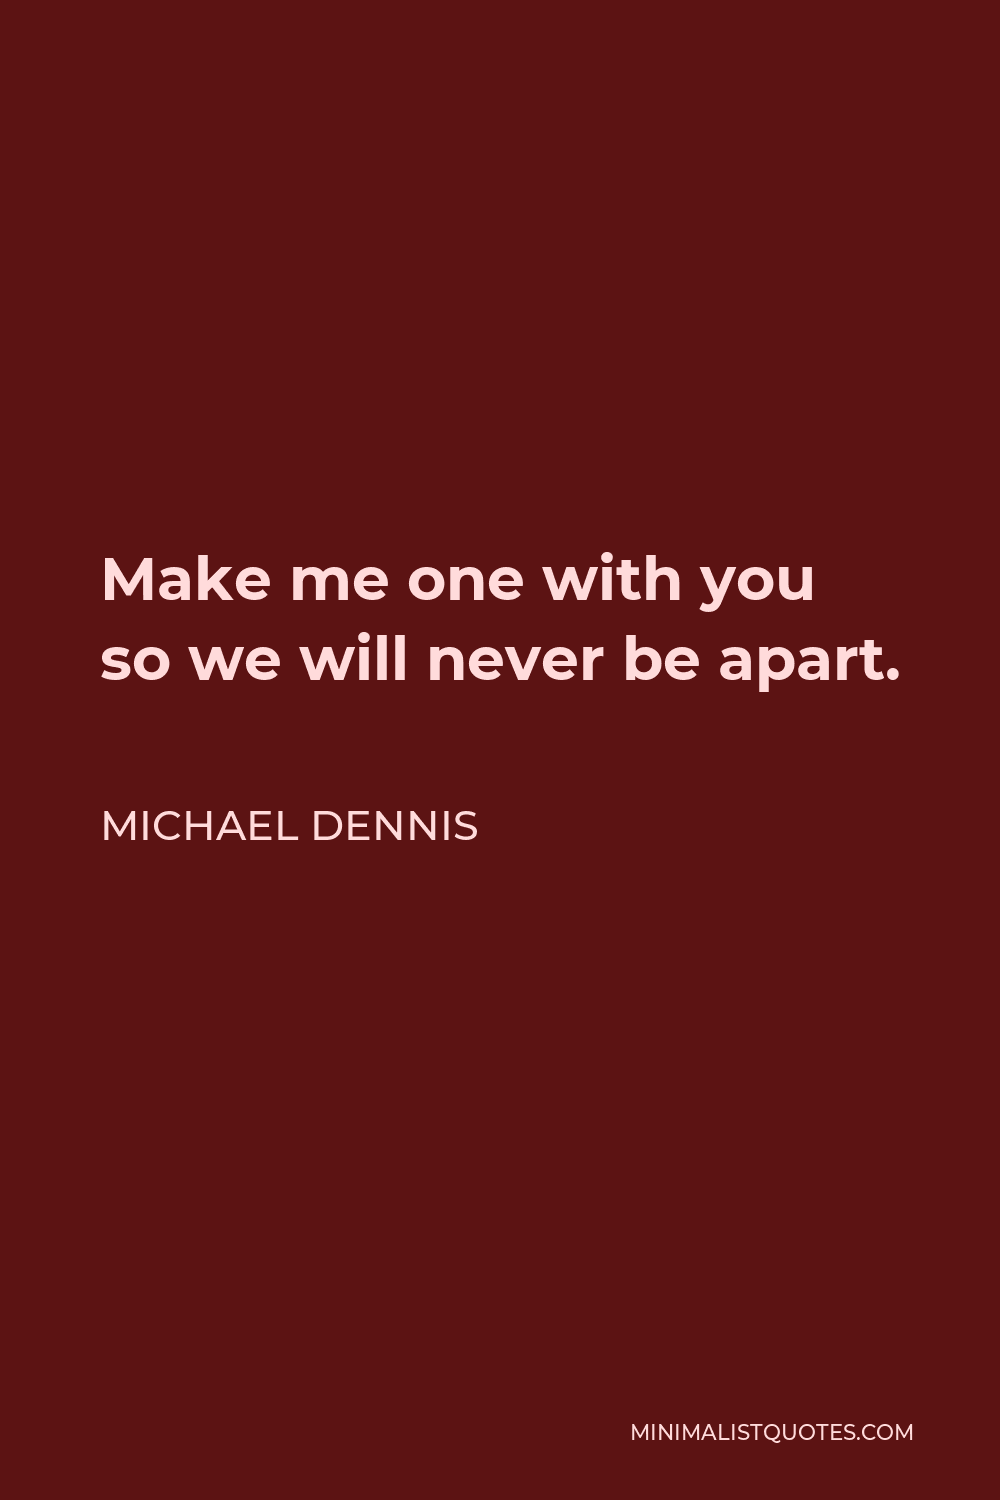 Michael Dennis Quote - Make me one with you so we will never be apart.